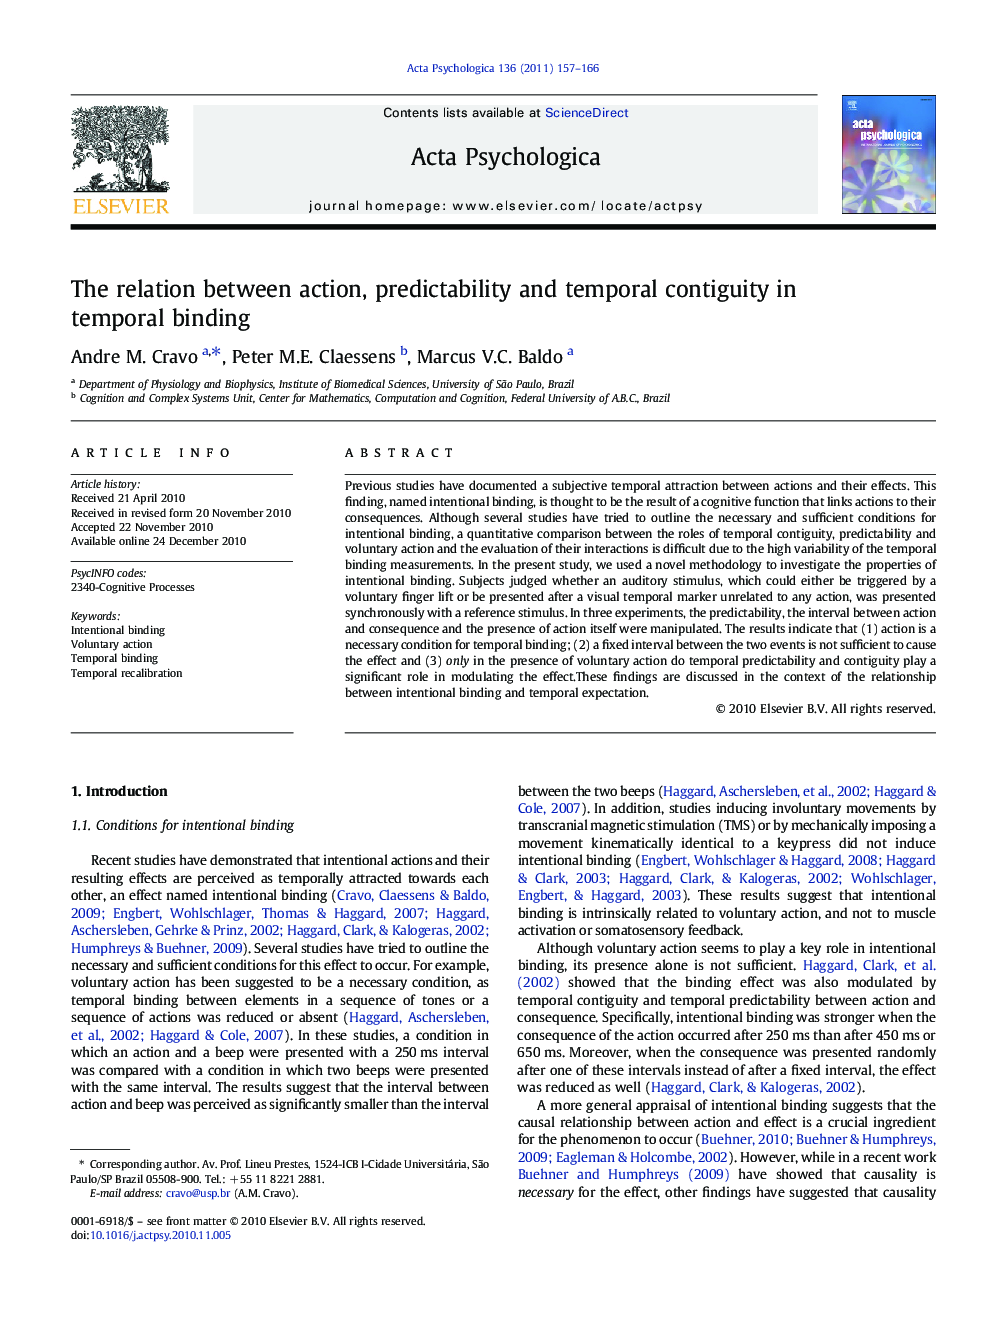 The relation between action, predictability and temporal contiguity in temporal binding